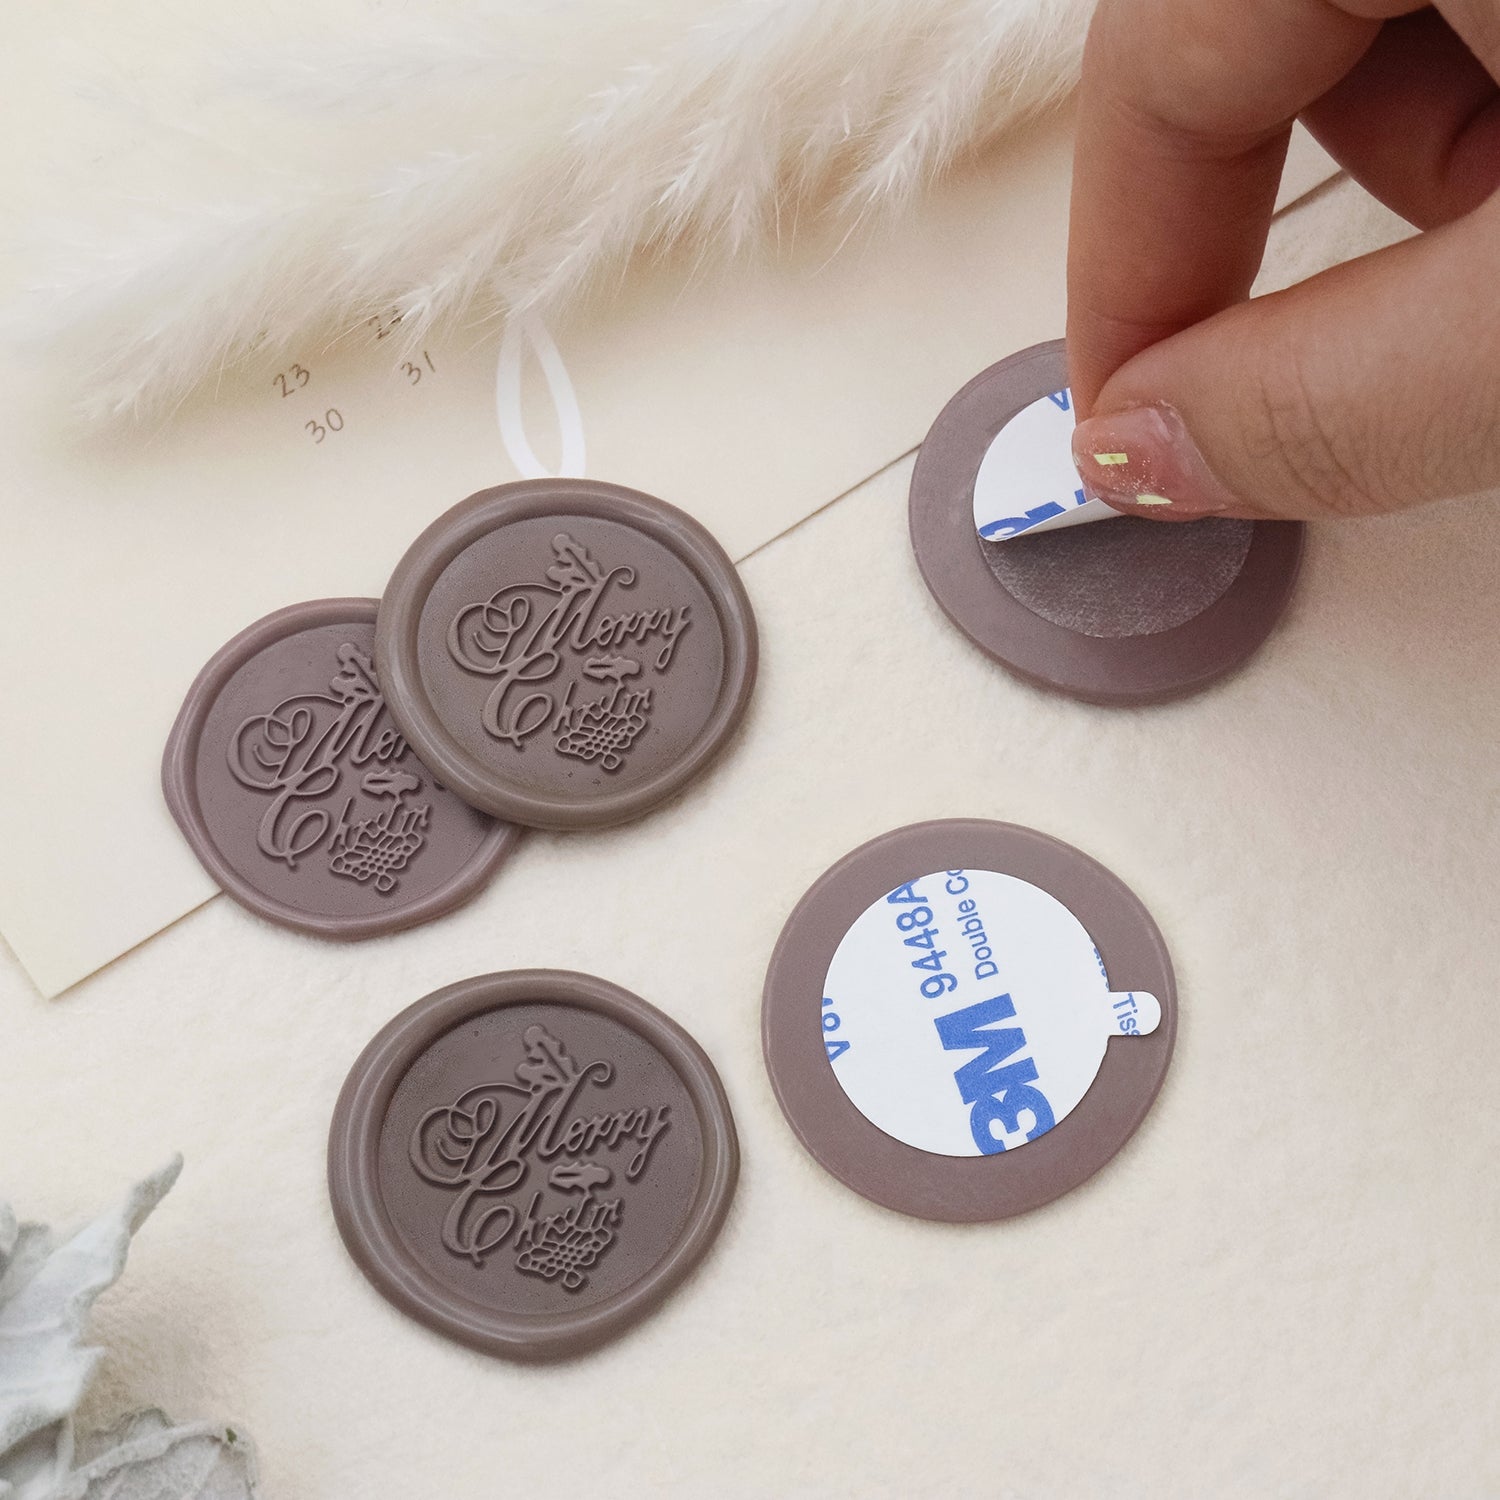 Stamprints Greeting Self-adhesive Wax Seal Stickers - Merry Christmas 2